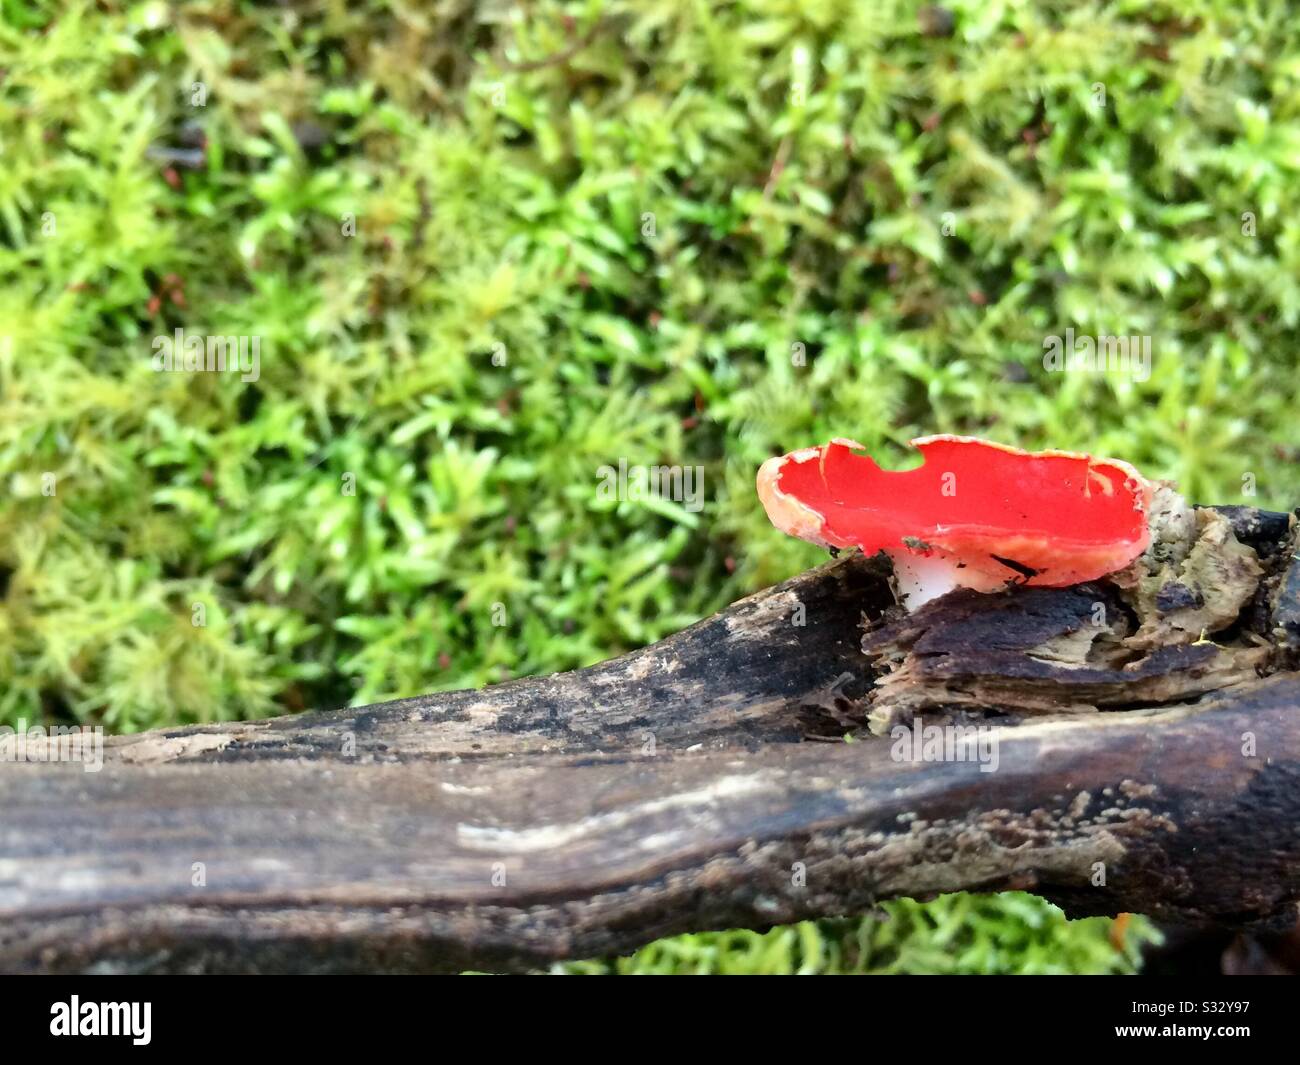 Small red mushroom on dry branch against green moss background. Stock Photo